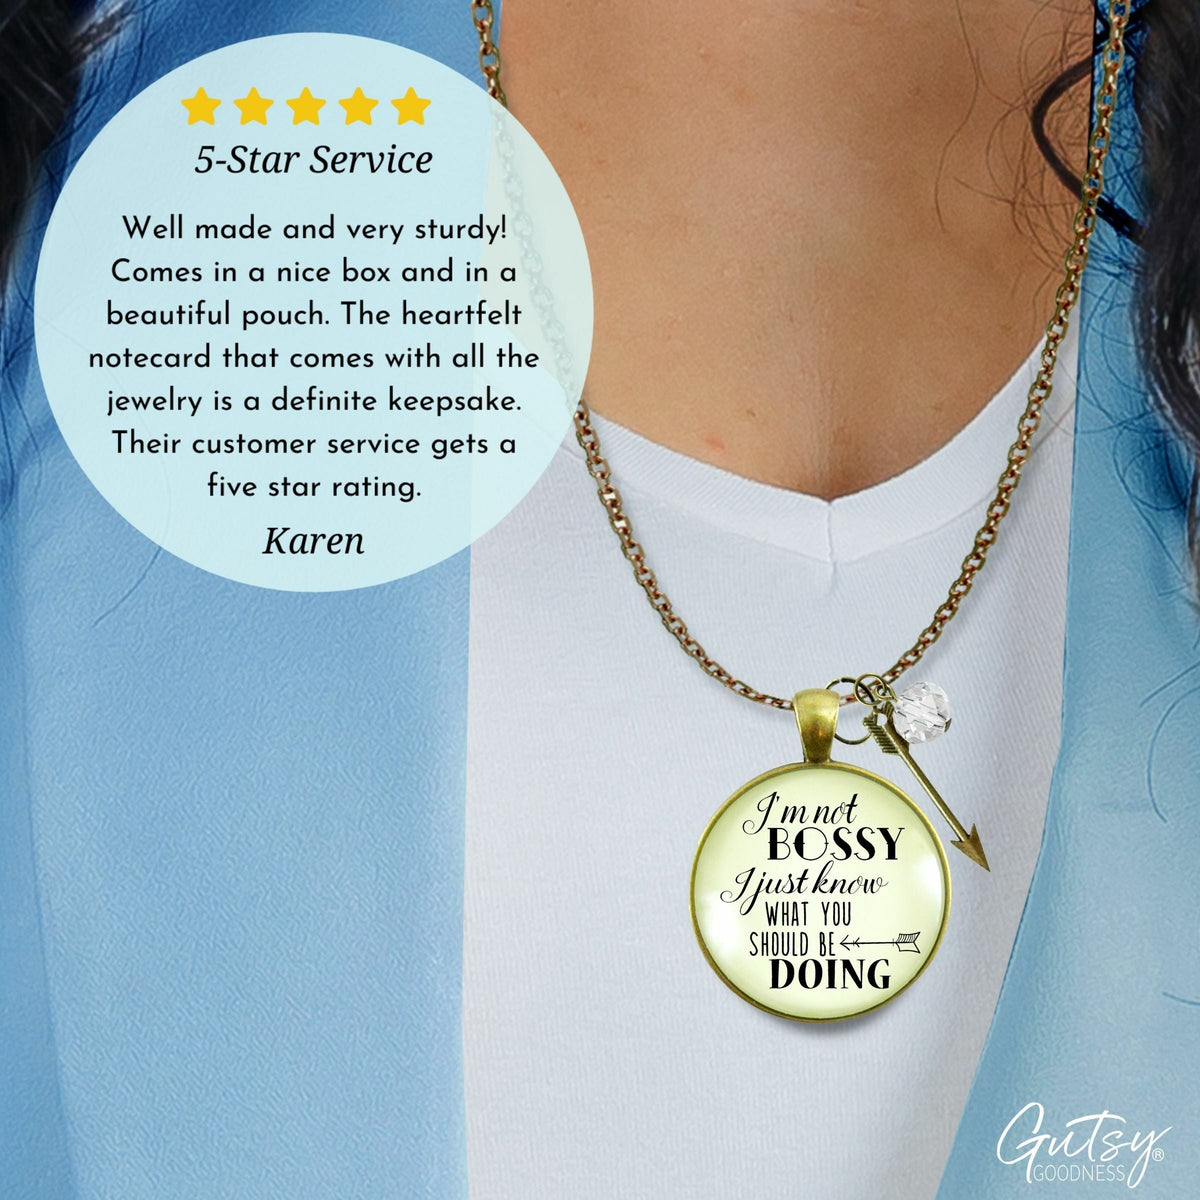 Gutsy Goodness I'm Not Bossy I Just Know What You Should Be Doing Necklace Jewelry Gift - Gutsy Goodness Handmade Jewelry;I'm Not Bossy I Just Know What You Should Be Doing Necklace Jewelry Gift - Gutsy Goodness Handmade Jewelry Gifts